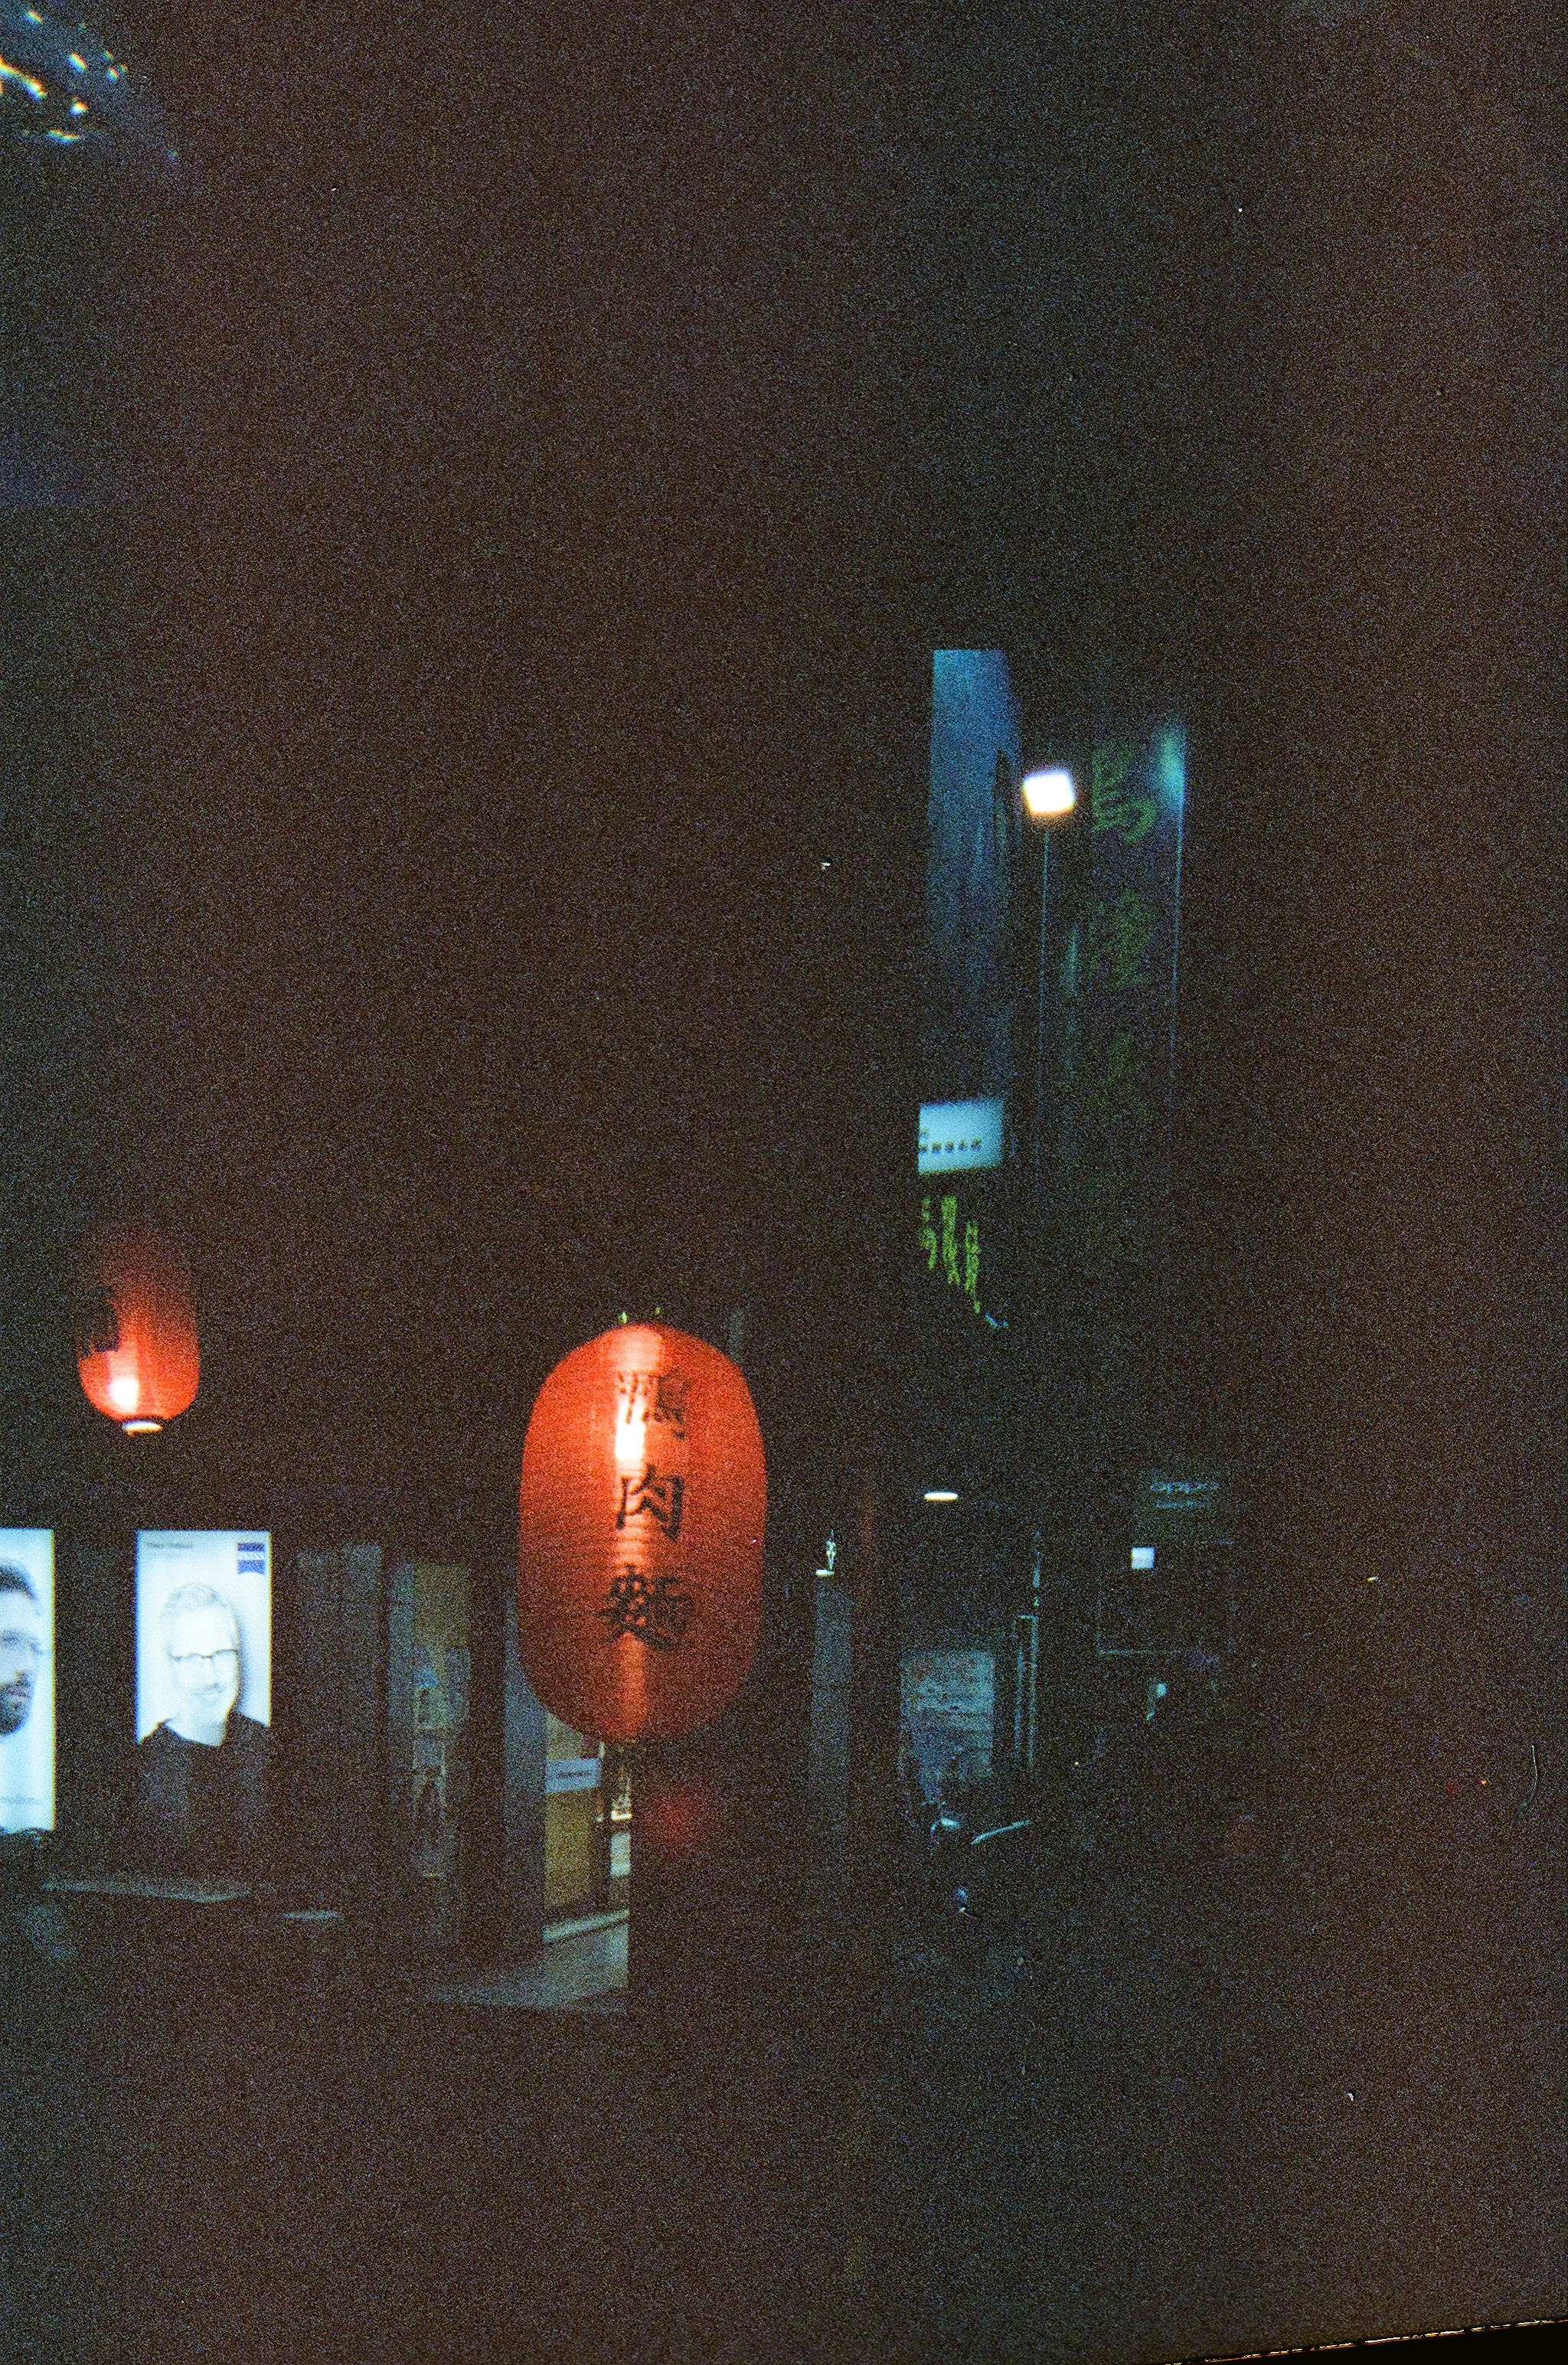 A red lantern in the night reading 'duck meat noodles'